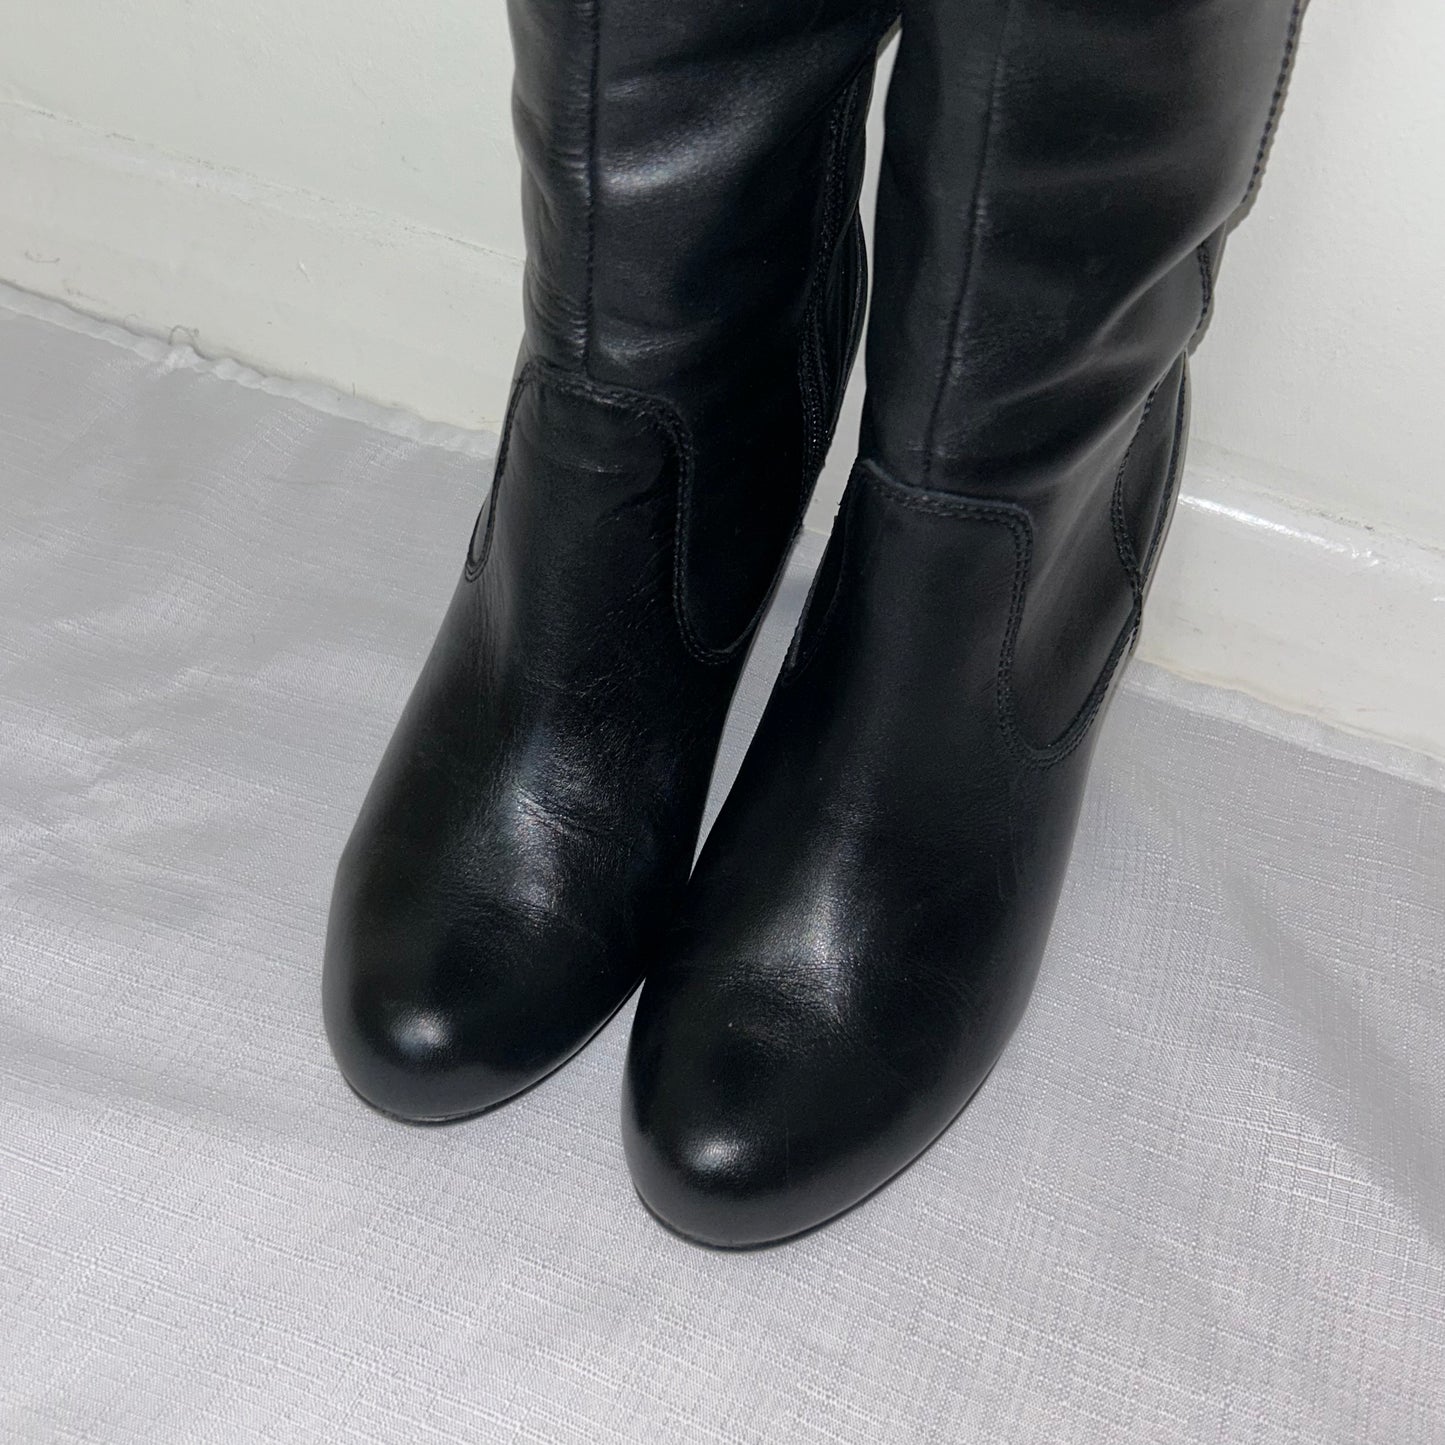 toes of black knee high real leather boots on a white background